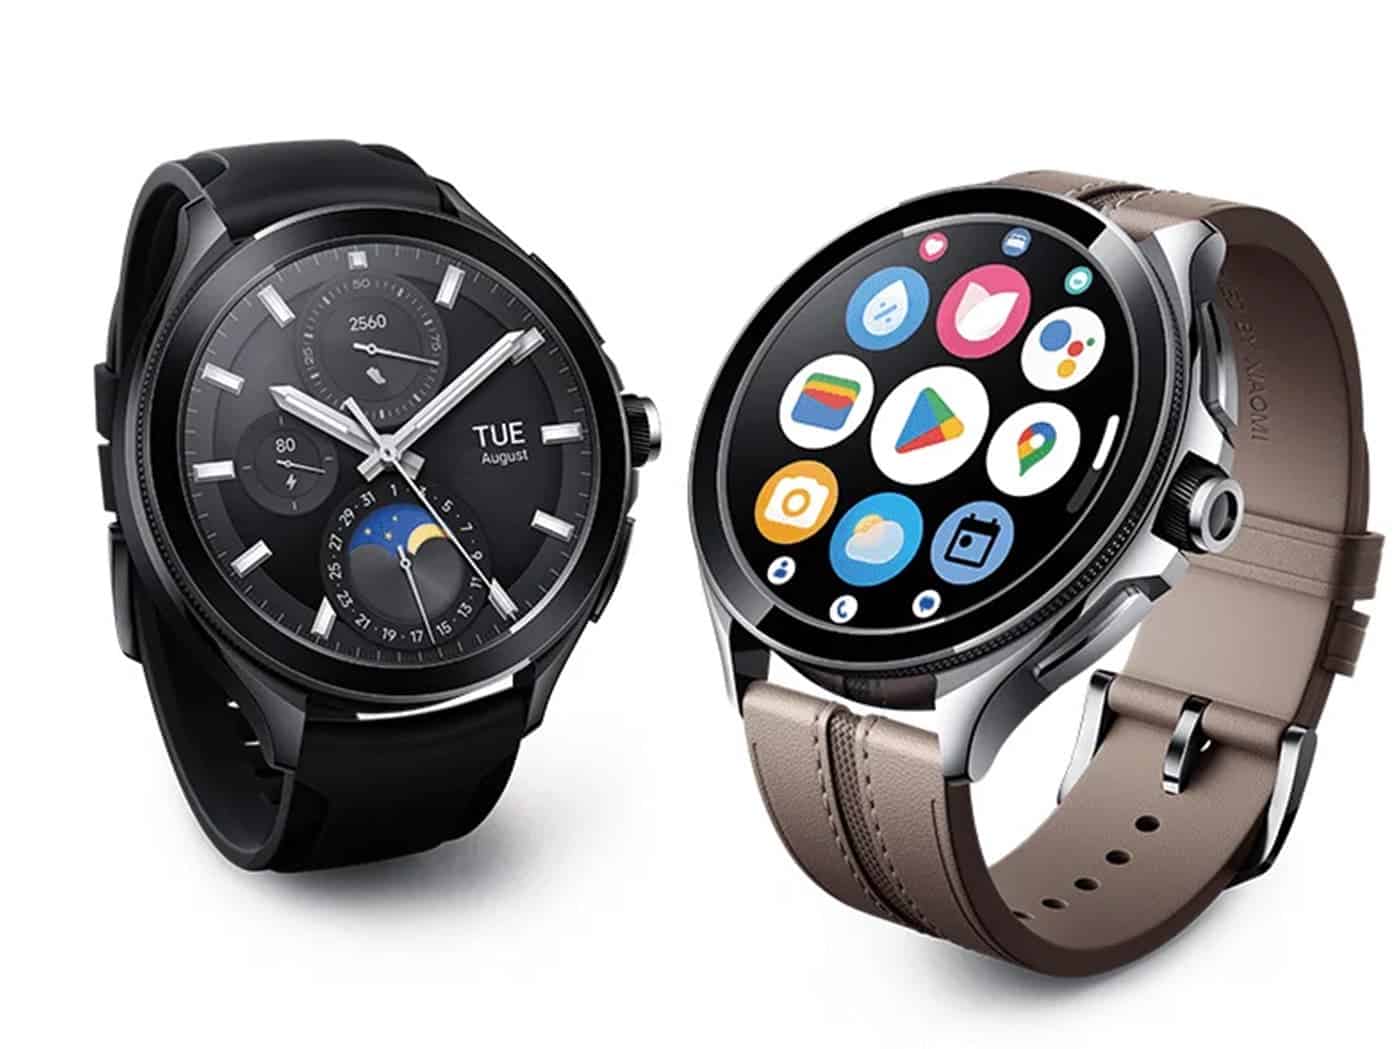 Best Smartwatches With NFC Payment In 2023 